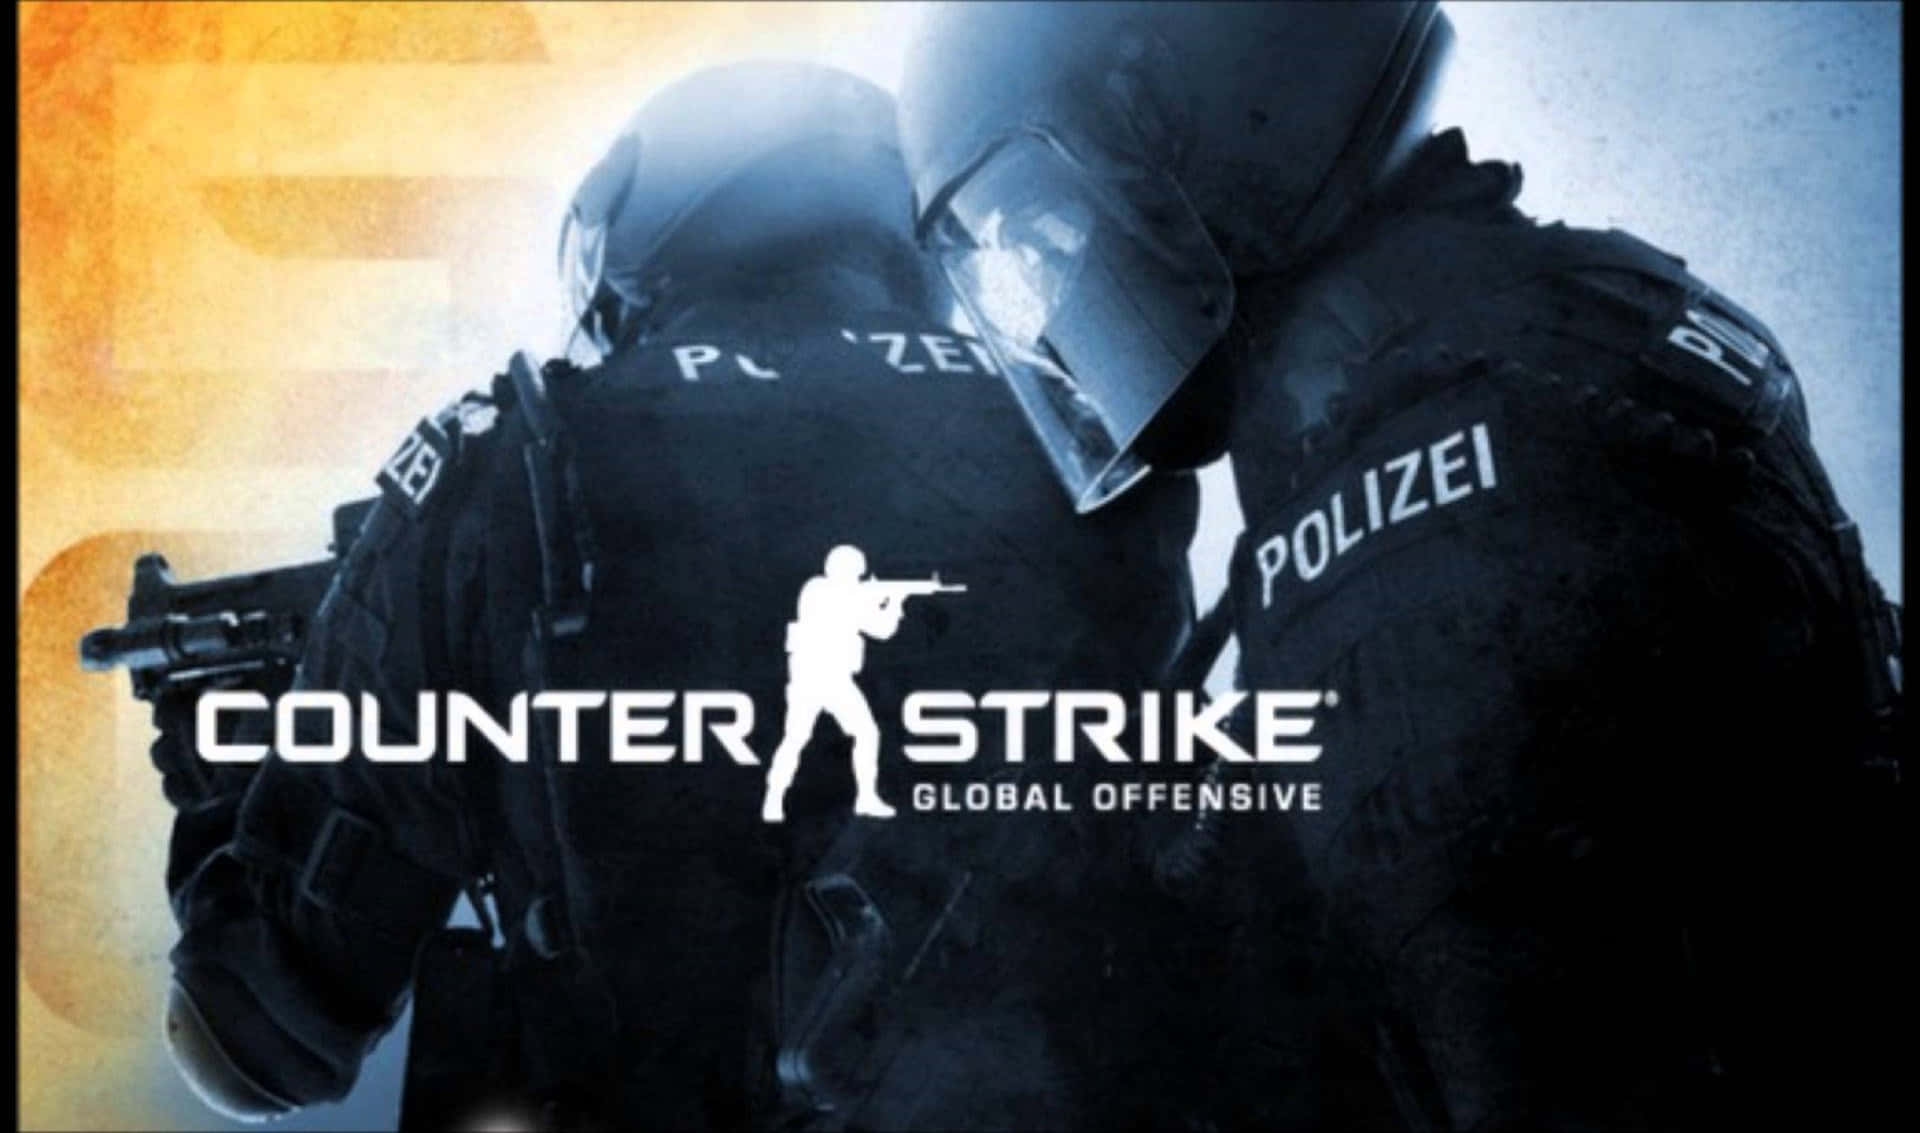 Experience Counter-Strike Global Offensive in Crisp 2440x1440 Resolution